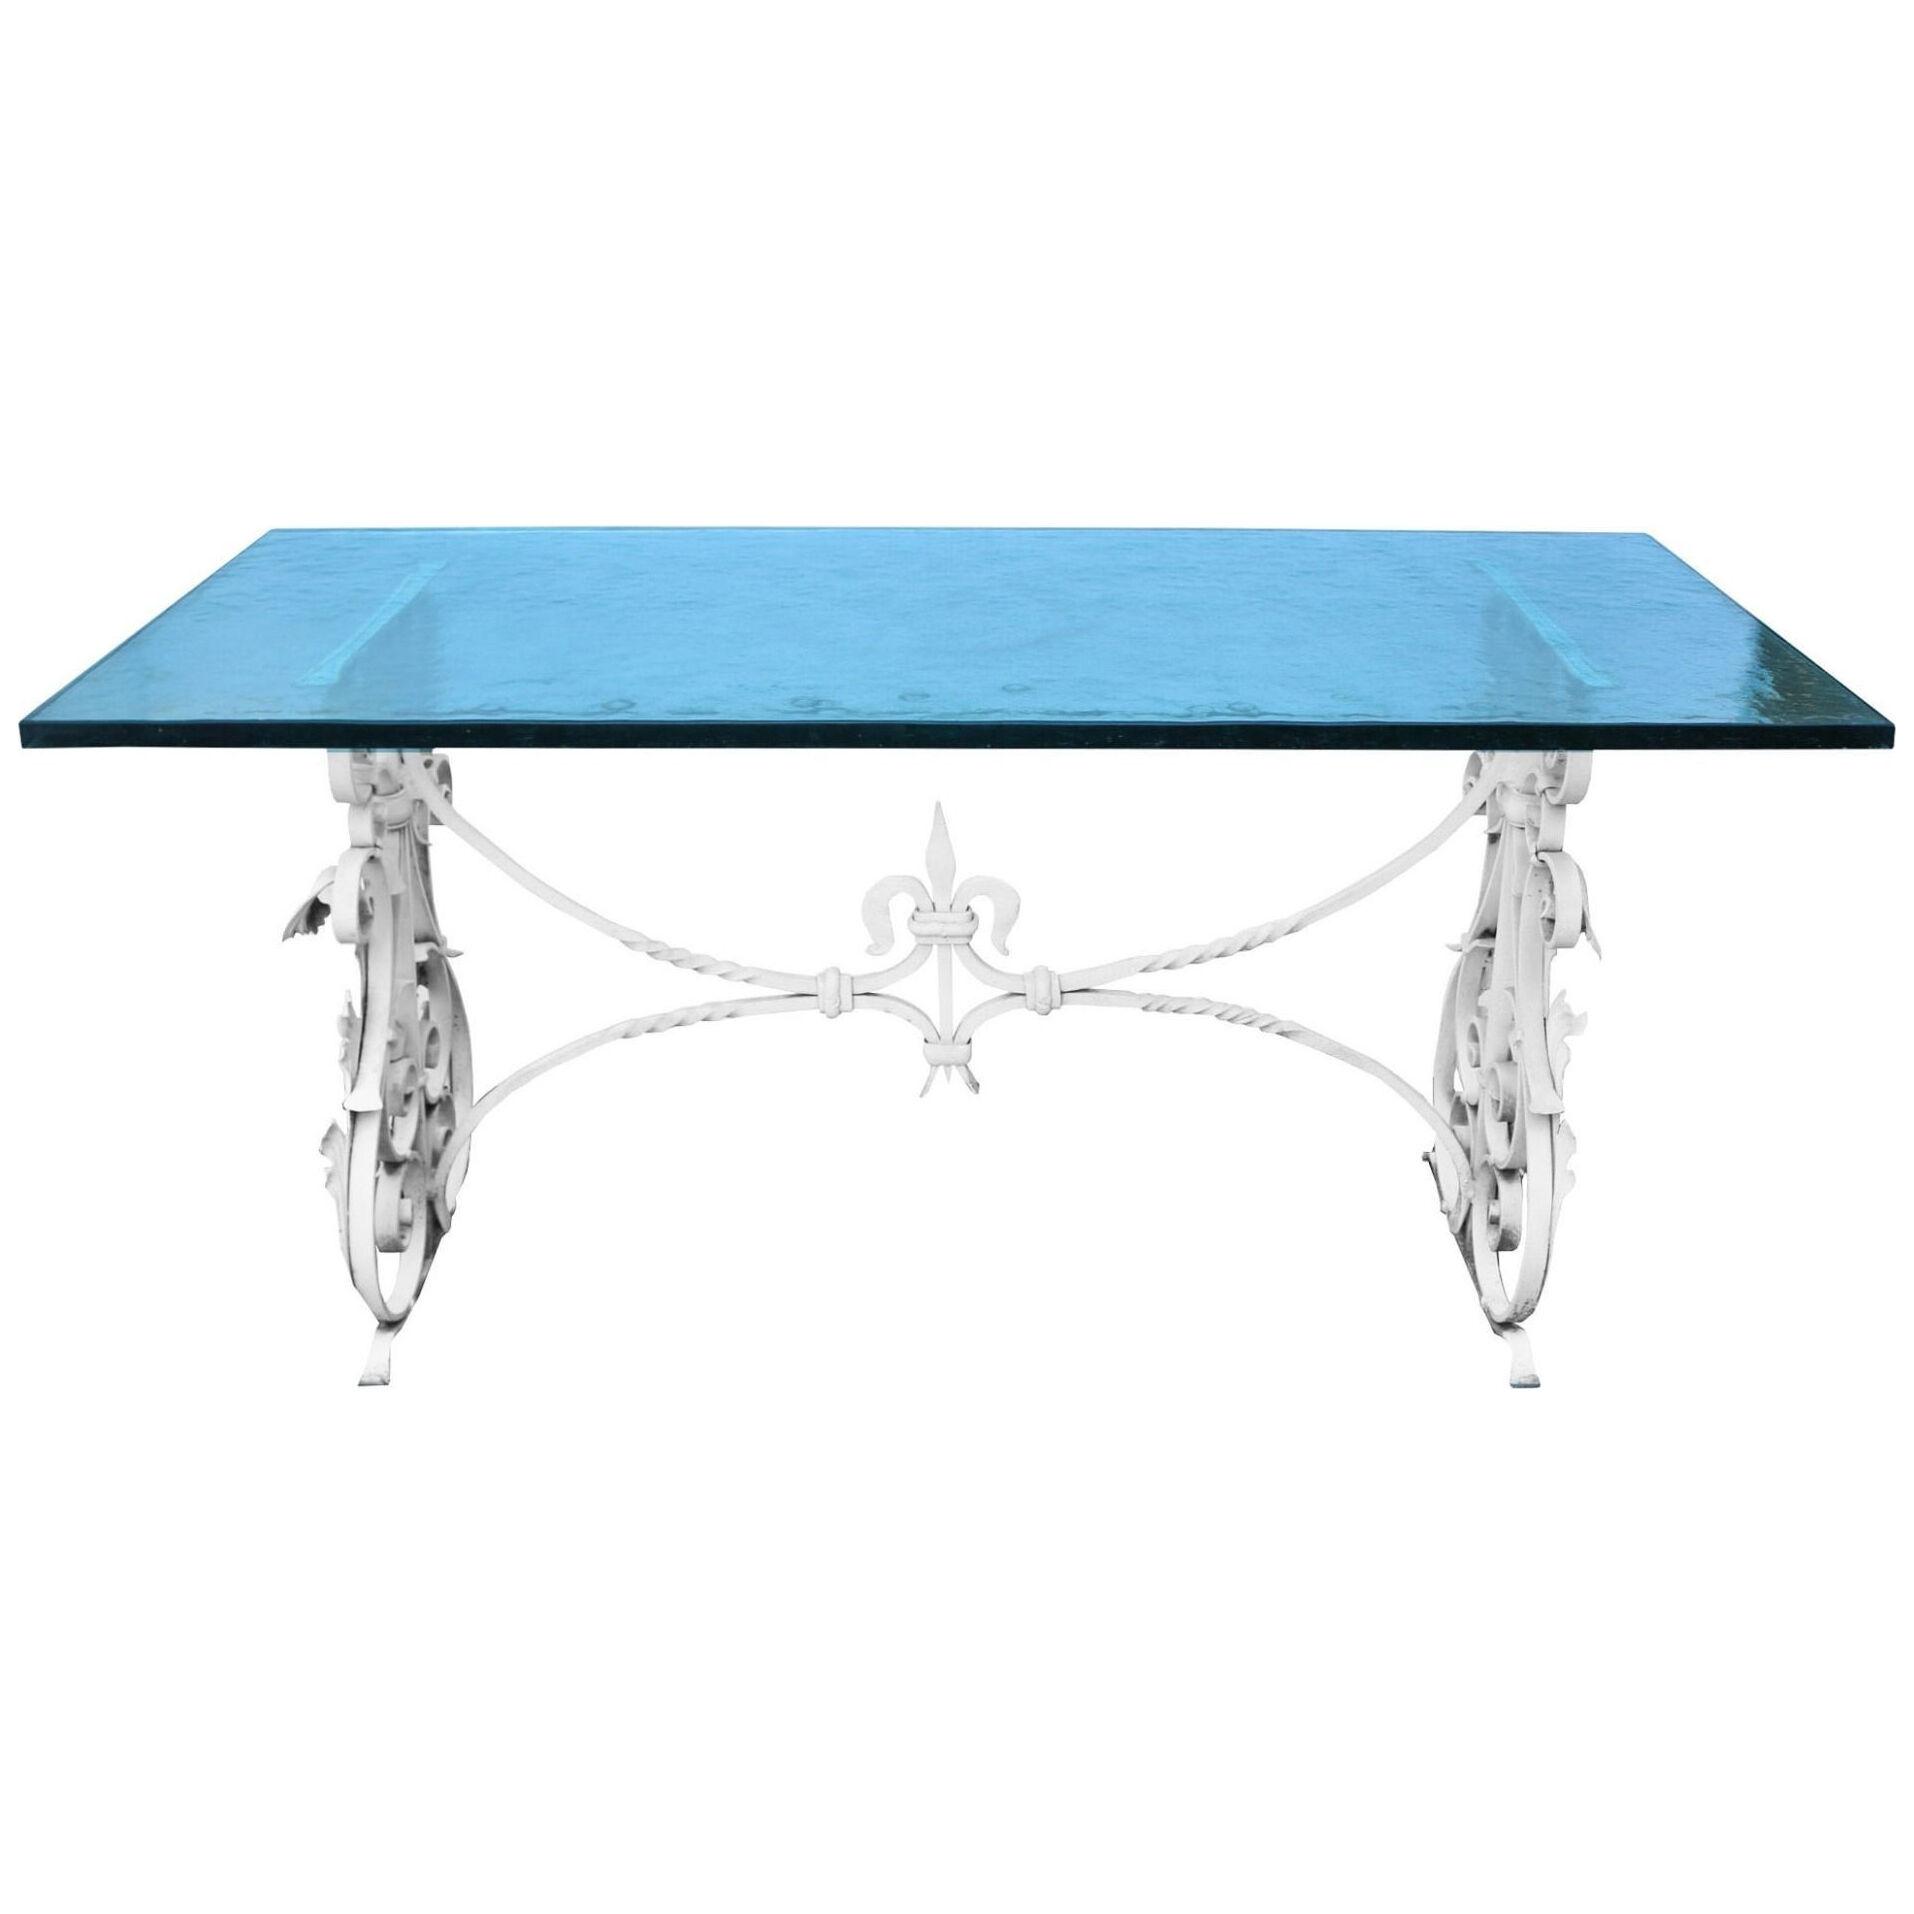 A Wrought Iron Conservatory or Garden Table